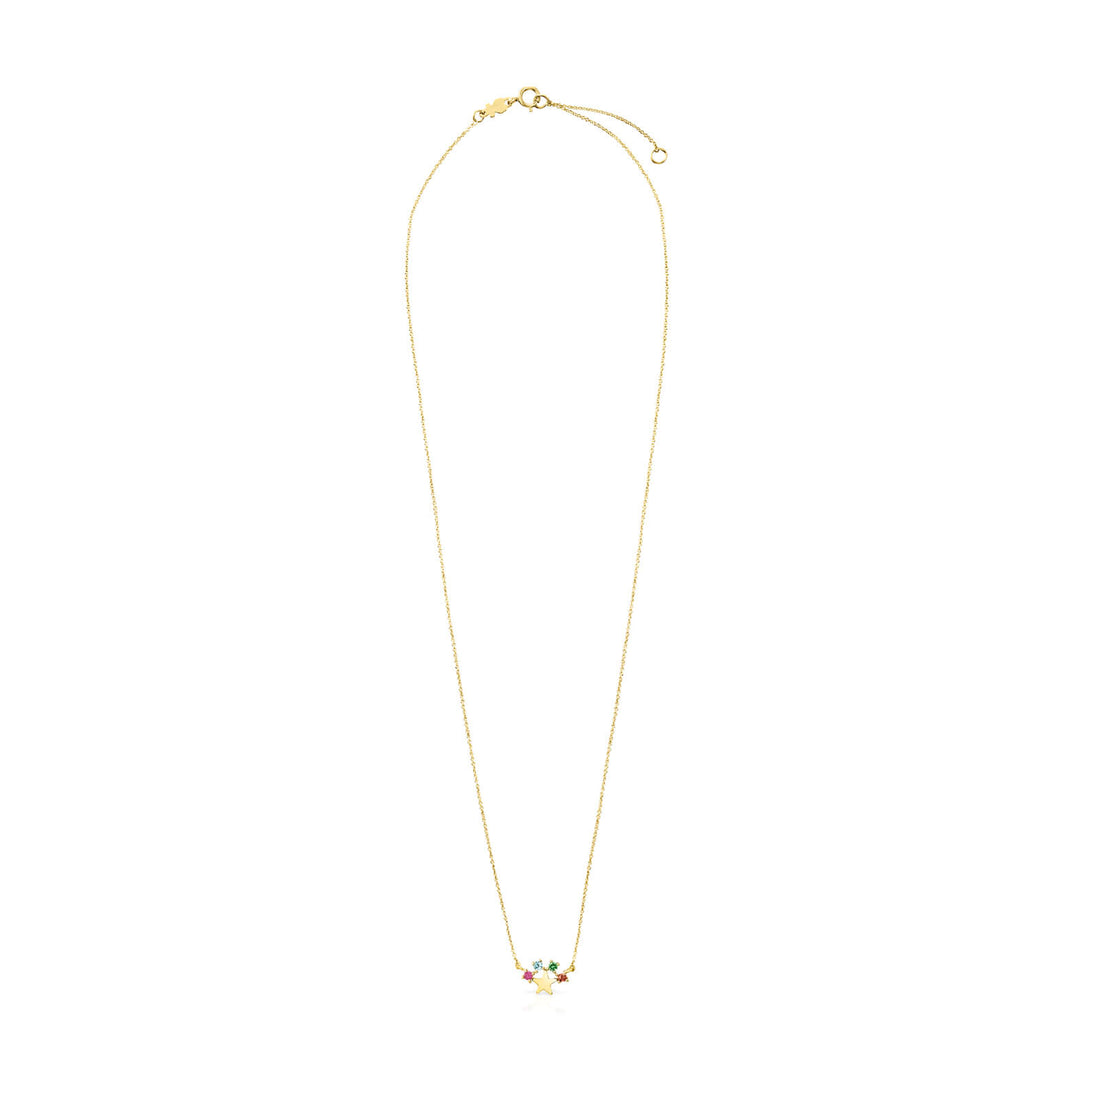 TOUS 18Kt gold Real Sisy Star Necklace